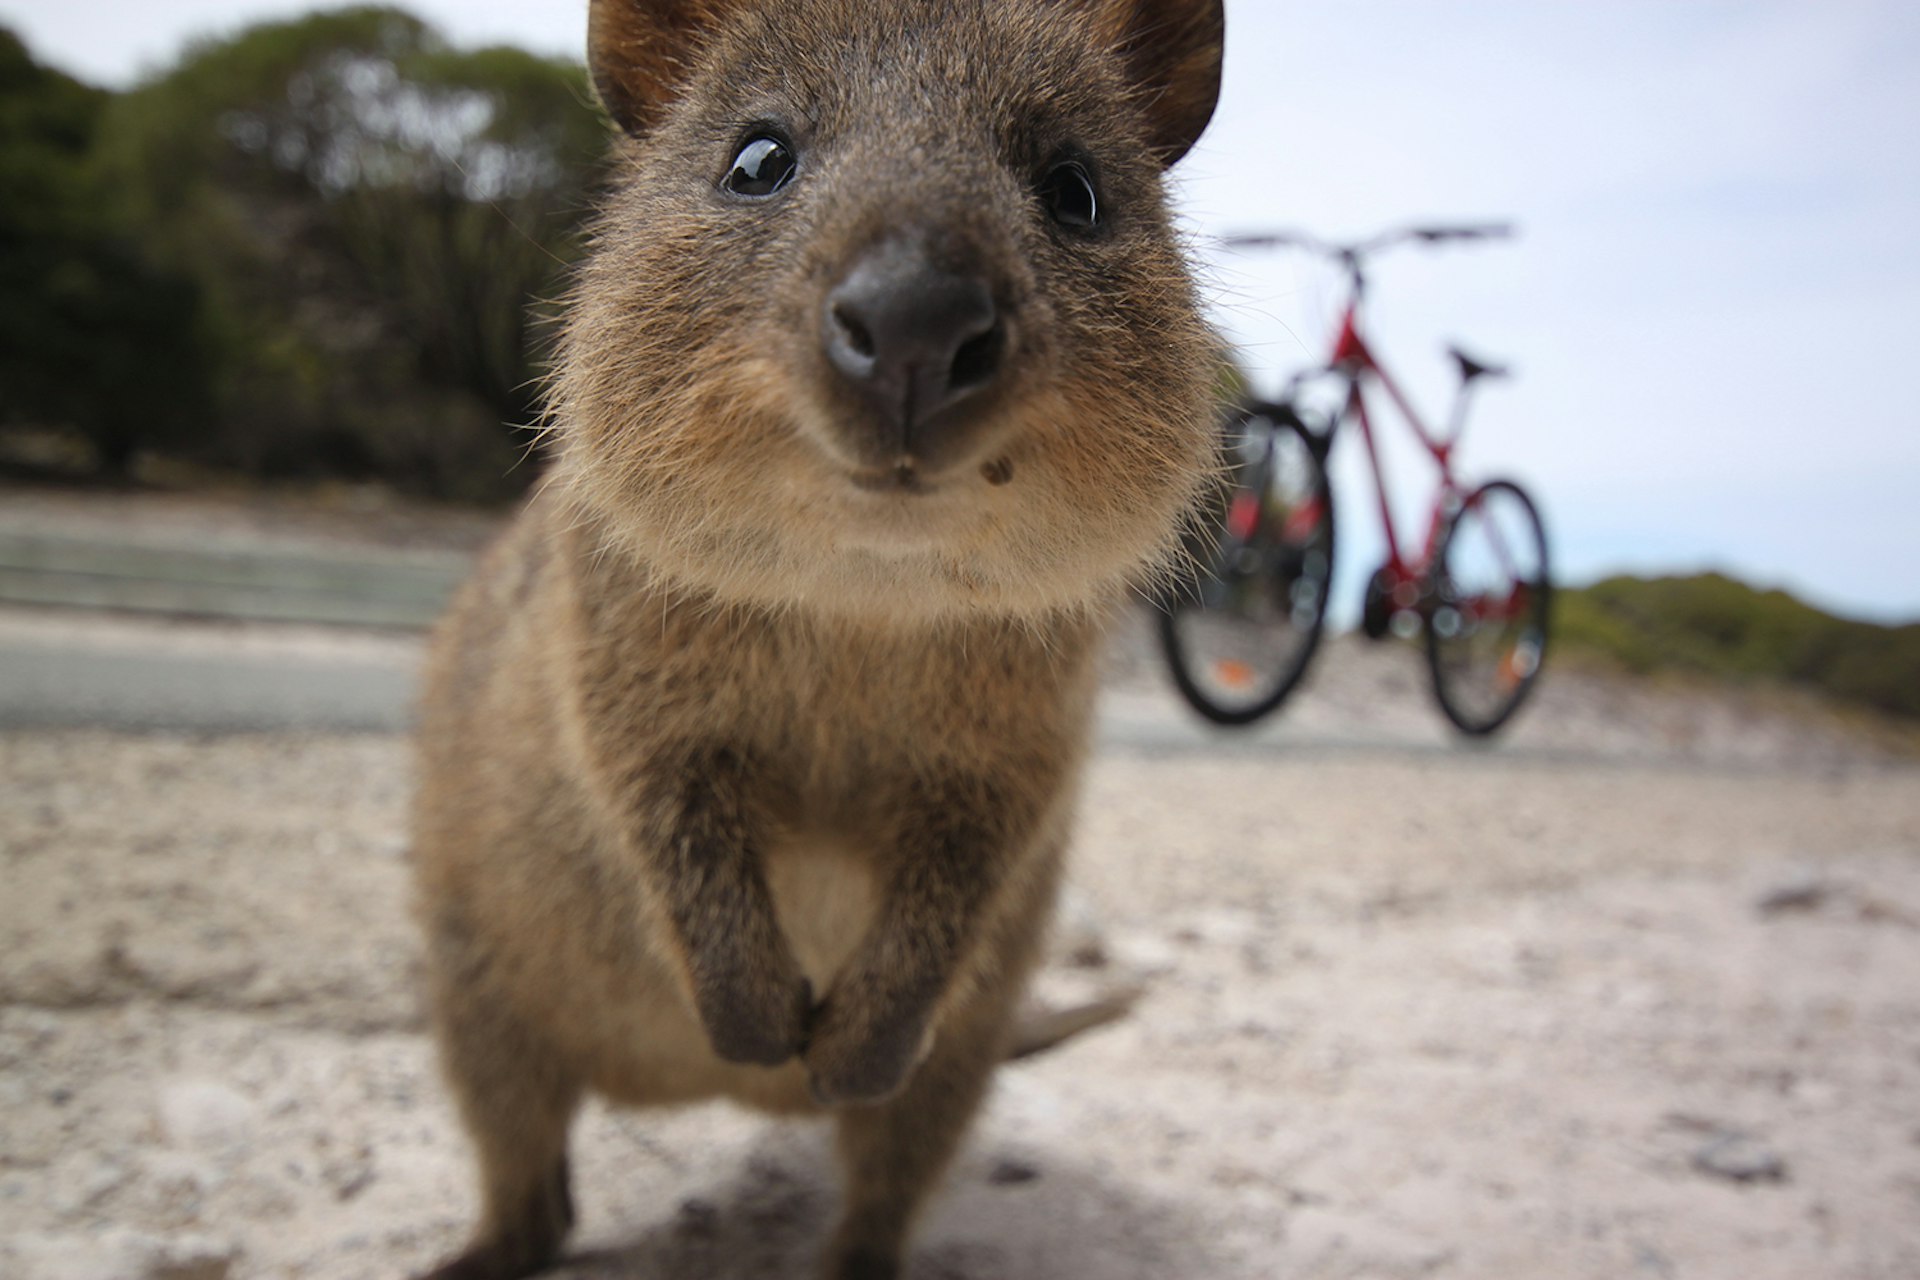 Western Australia is so rich in wildlife that it might just come looking for you, like this curious quokka. Image by Katy Clemmans / Moment / Getty Images